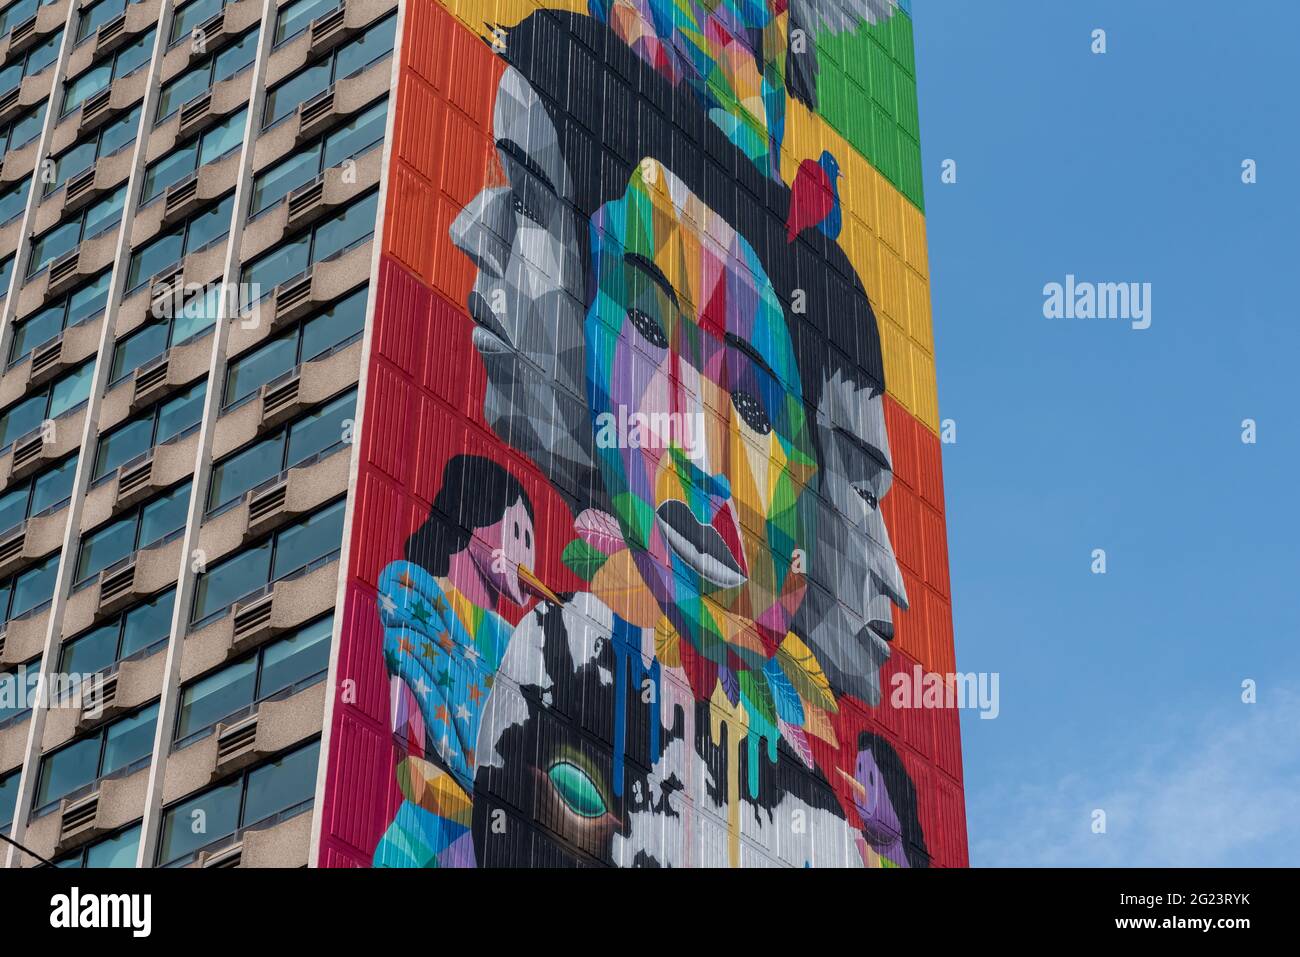 Mural named 'Equilibrium' in a building located in Jarvis Street and Carlton Street, Toronto, Canada Stock Photo